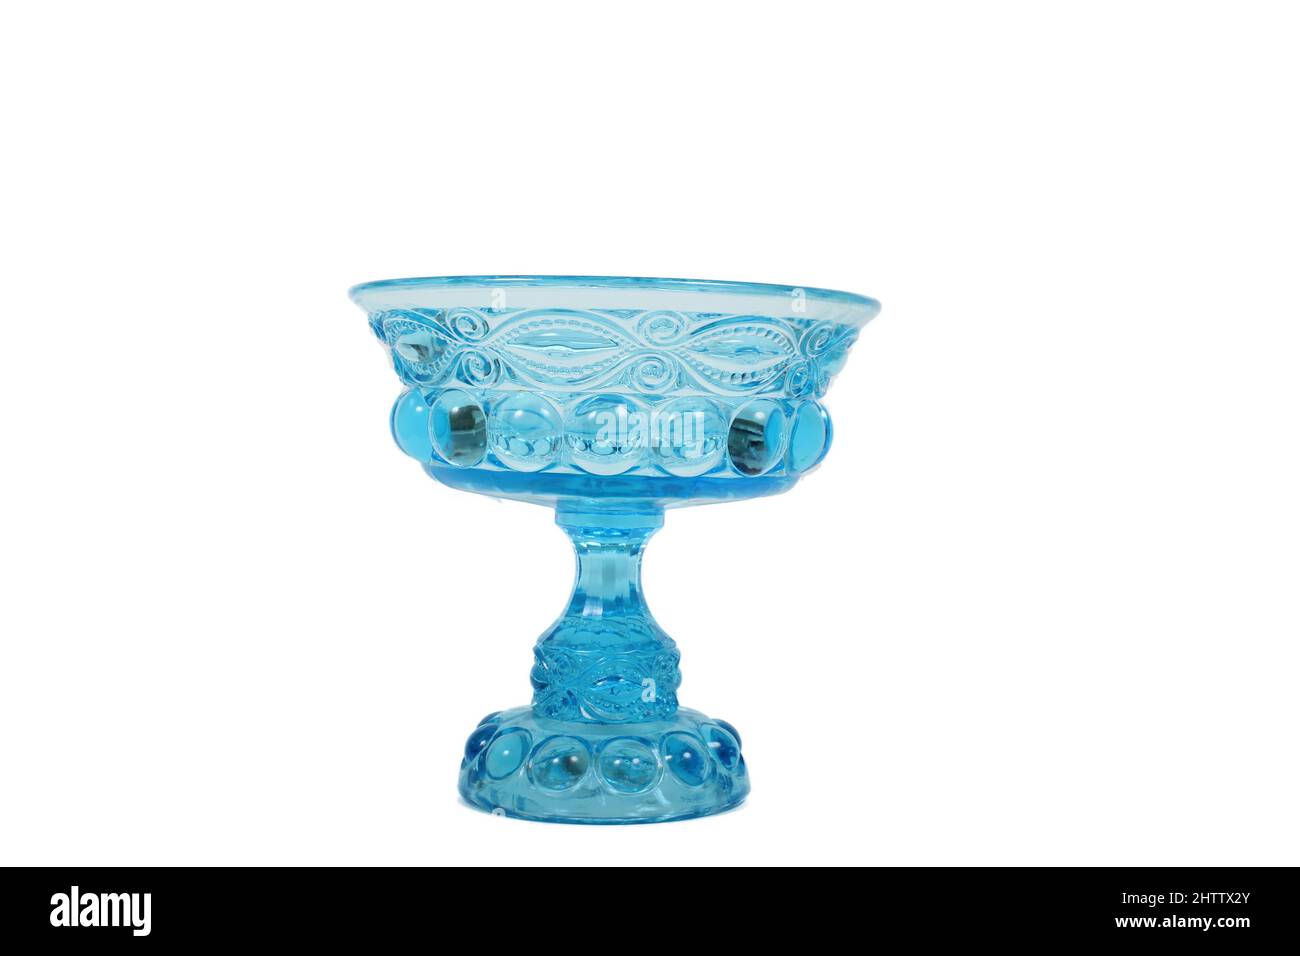 Antique Blue Glass Bowl With Swirl Pattern on White Background Stock Photo